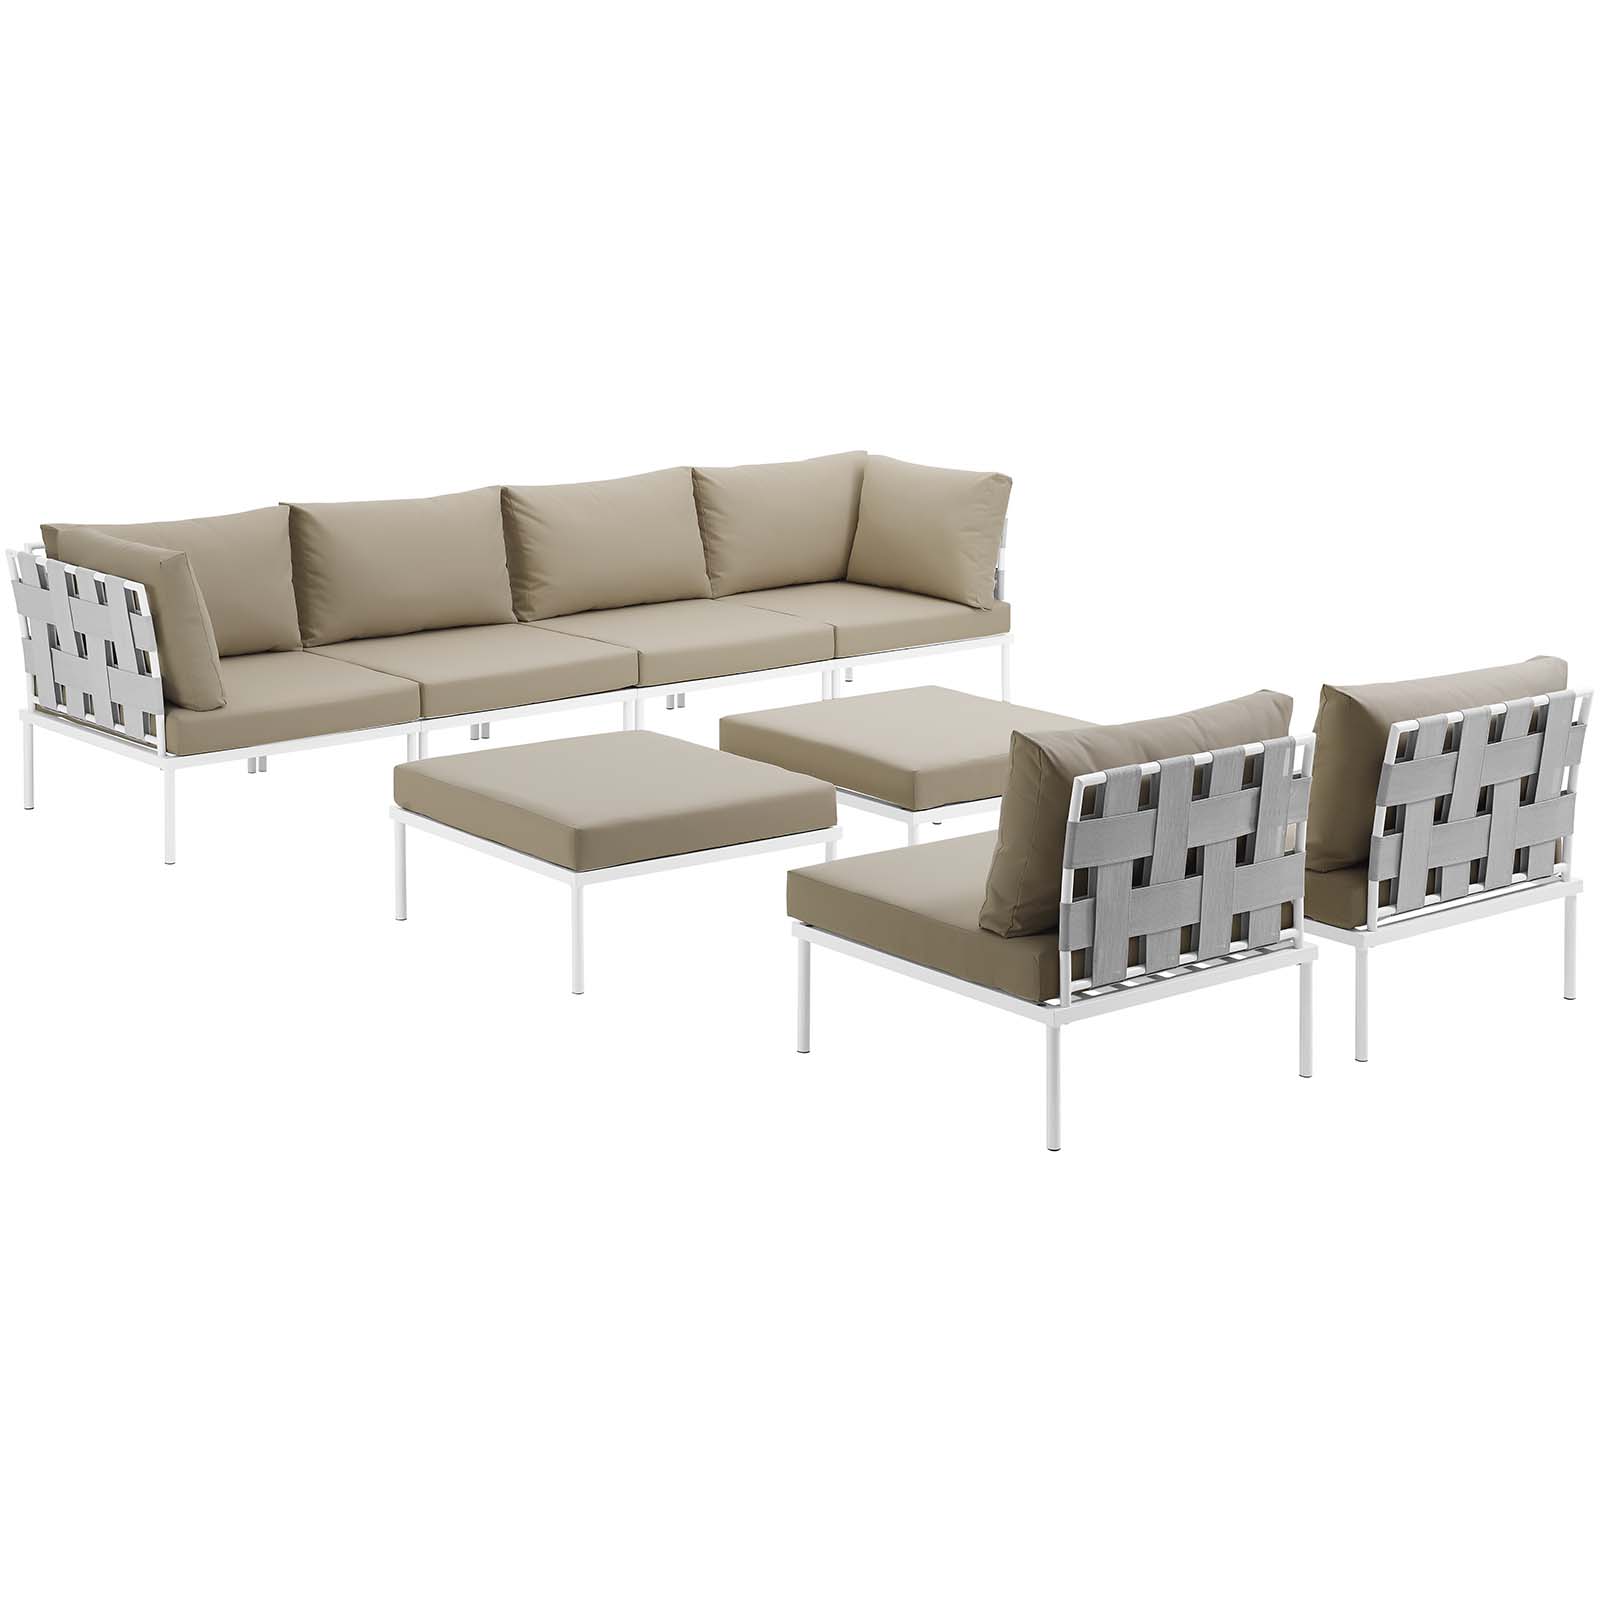 Modway Harmony 8 Piece Outdoor Patio Aluminum Sectional Sofa Set in White Beige - image 2 of 7